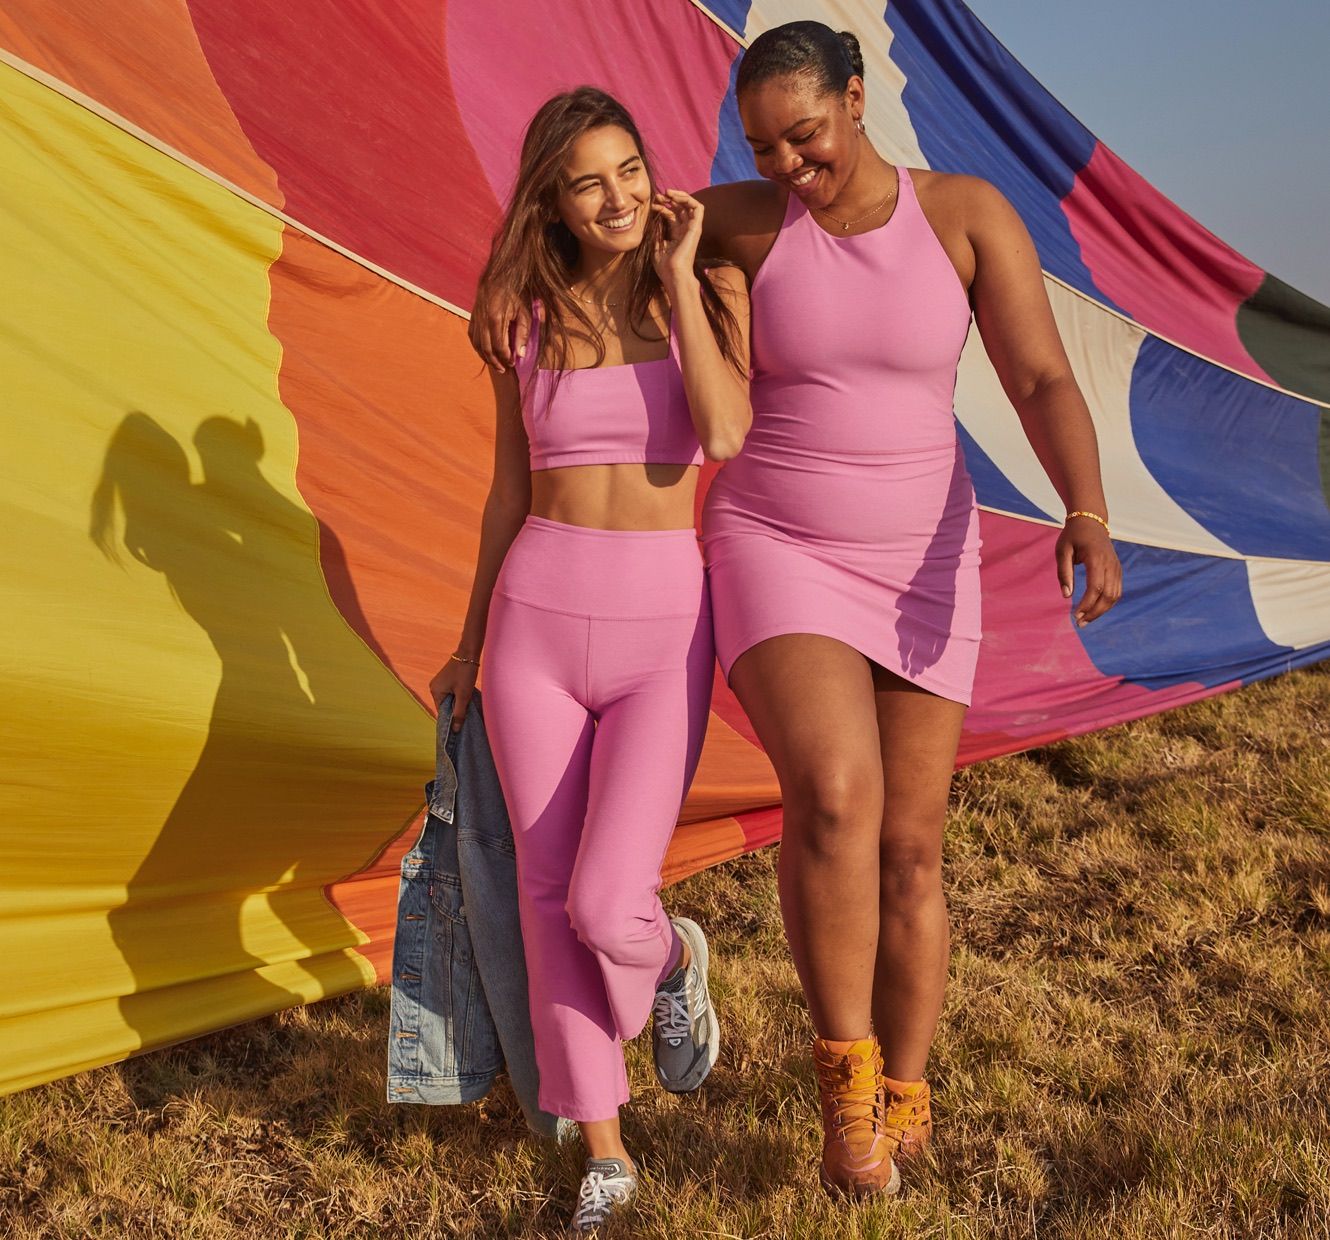 model on the left is wearing a pink square neck bra top and pink hig-waisted flare capri pants. model on the right is wearing a pink high-neck mini dress. 